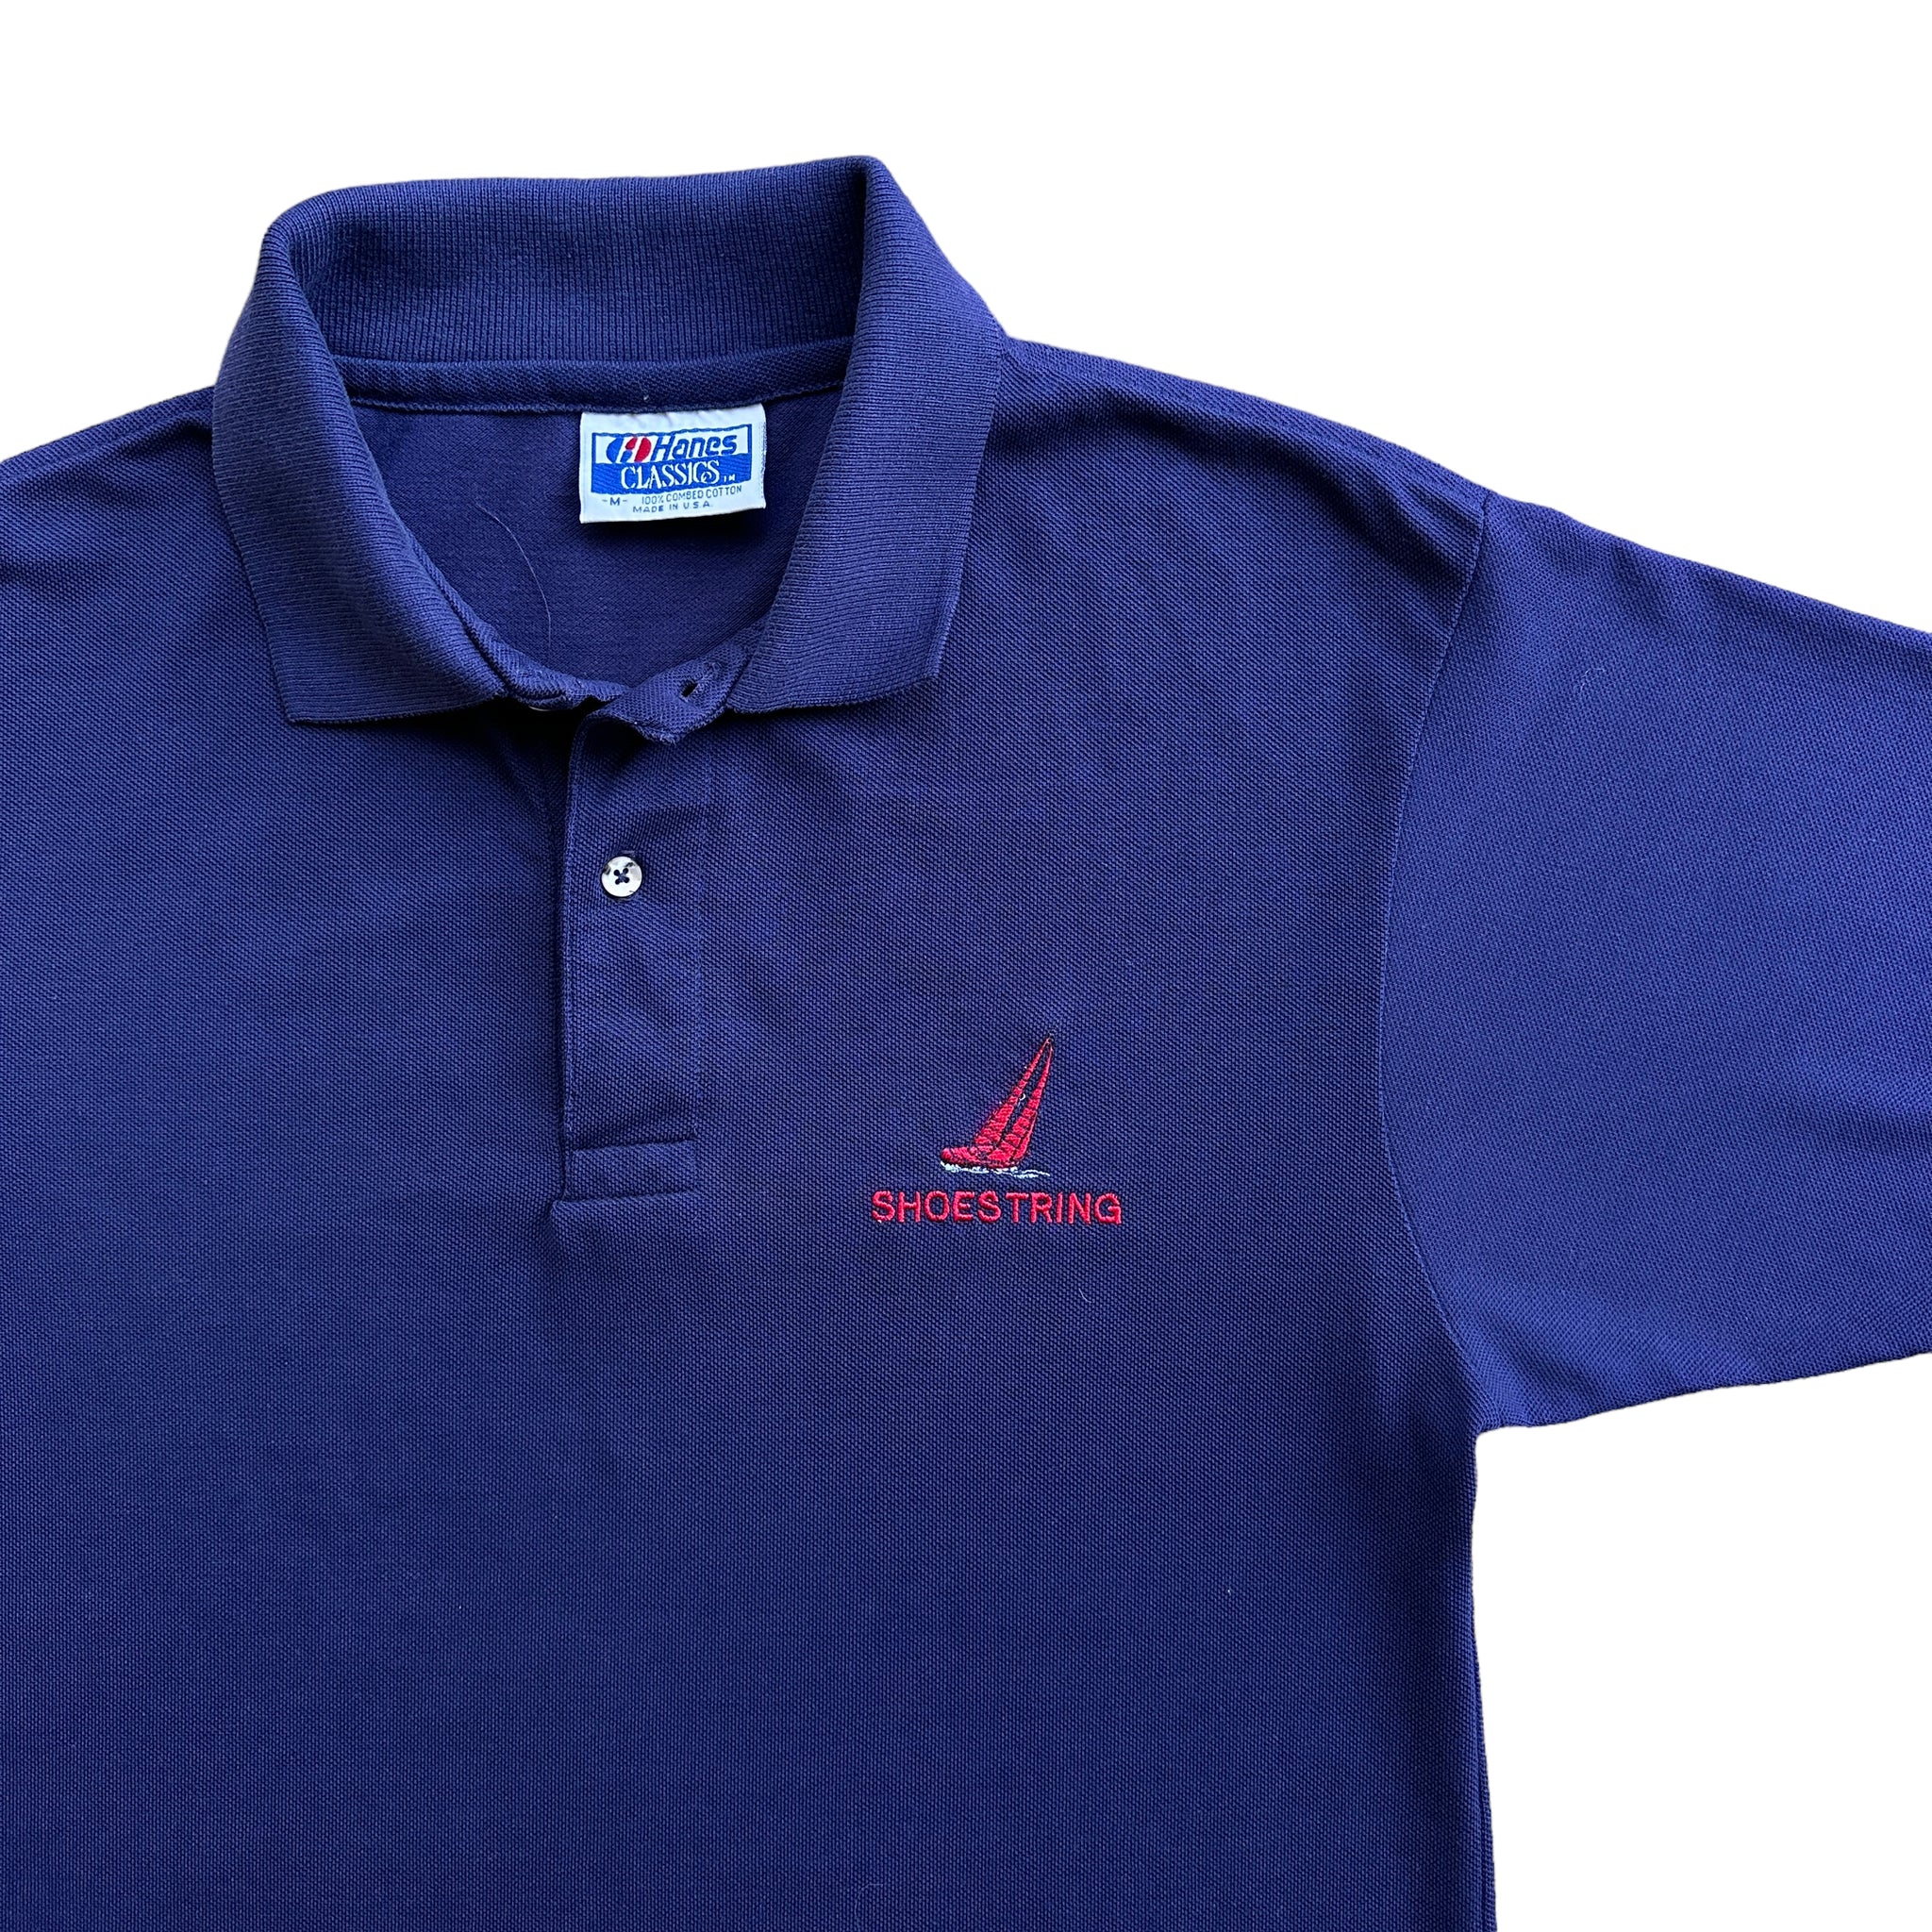 90s Shoestring sailboat polo large